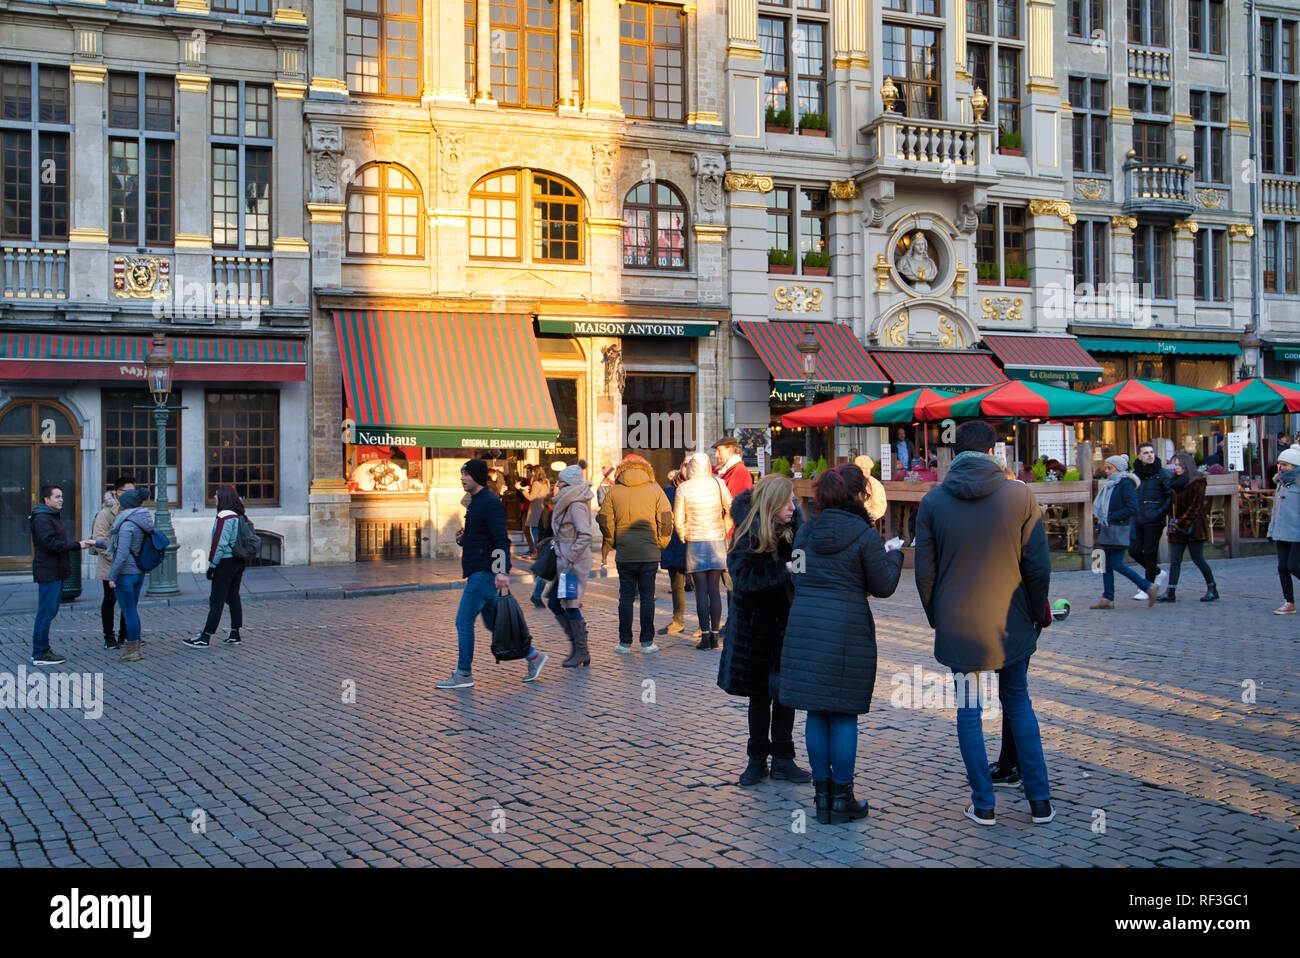 Brussels, Belgium - JANUARY 20, 2019: tourists on Grand Place Stock Photo